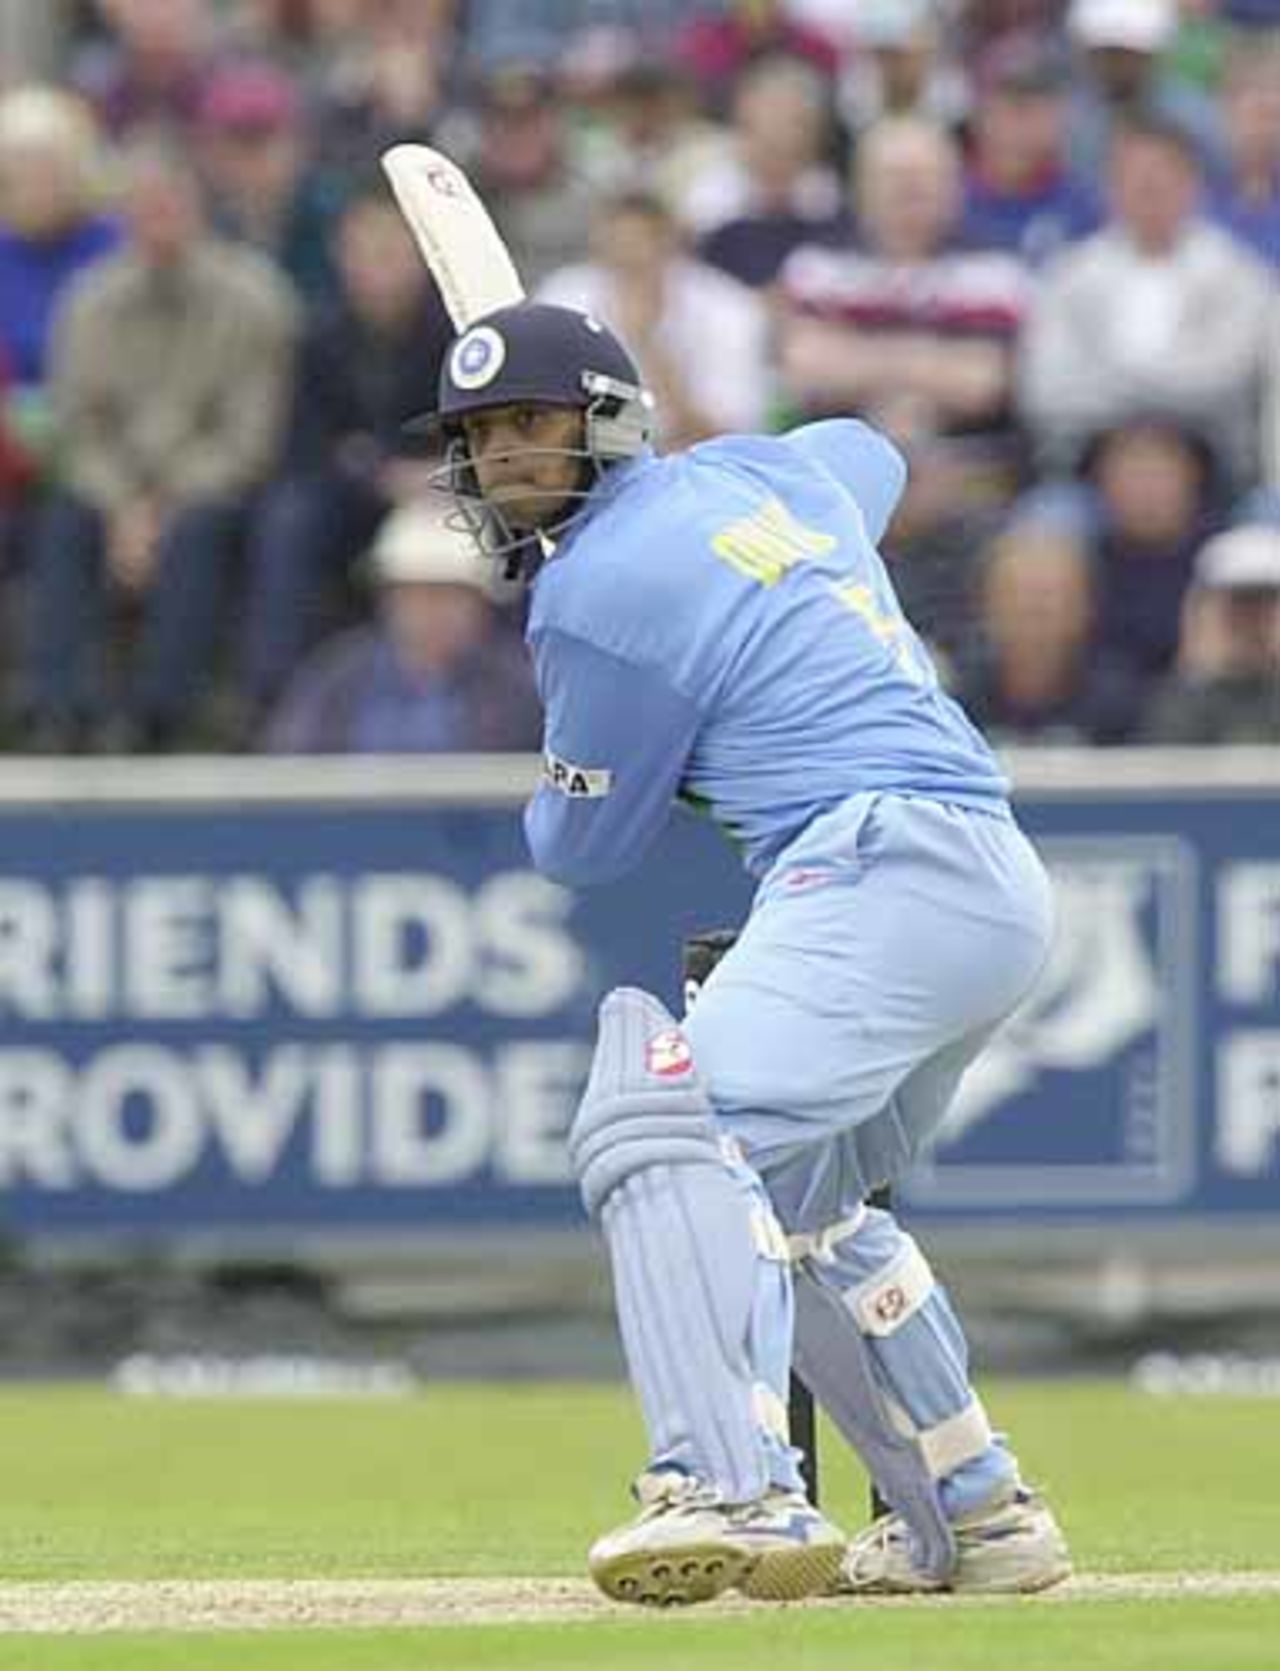 Dravid advances down the wicket as he puts on a mammoth stand with Tendulkar England v India at Chester-le-Street, July 2002